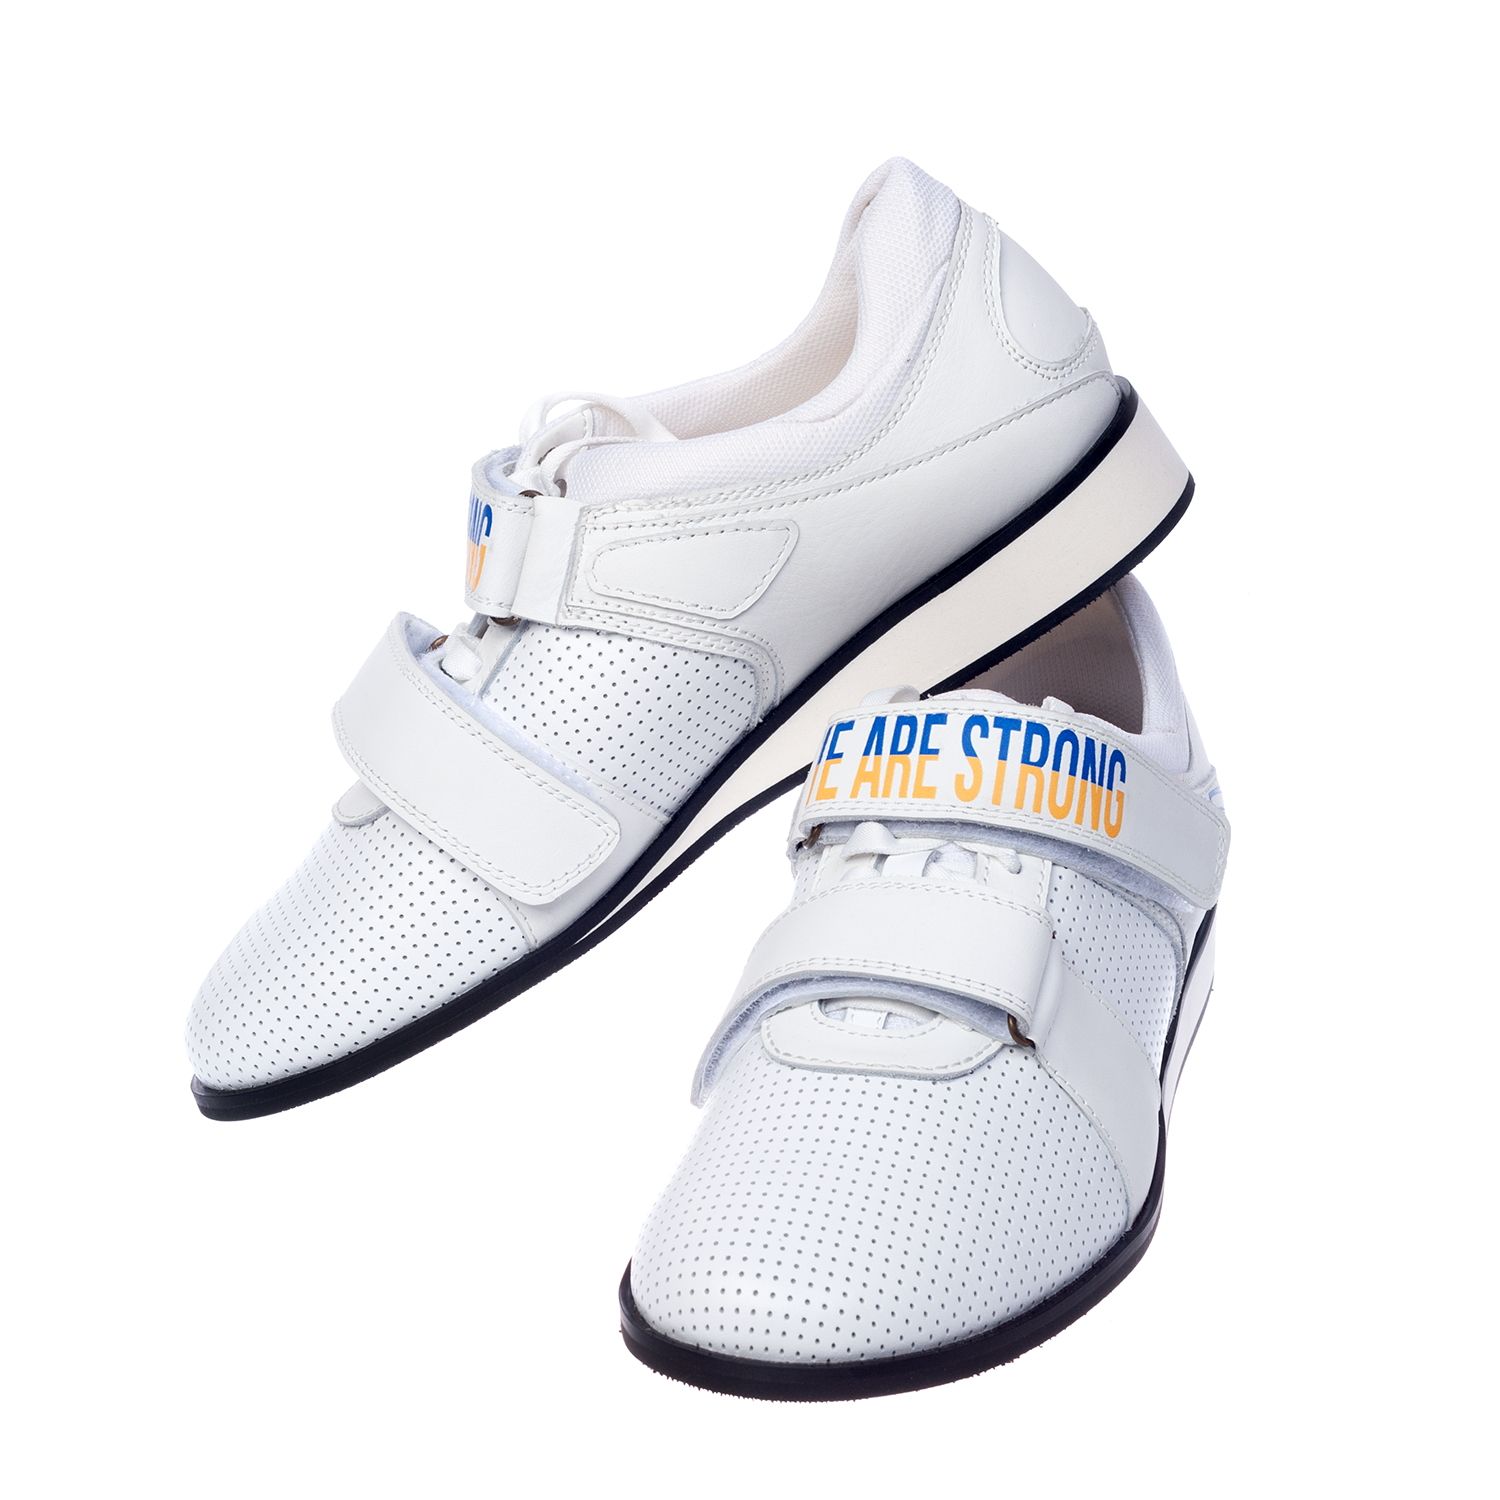 Weightlifting shoes We are strong, white, size 48 (UKR)